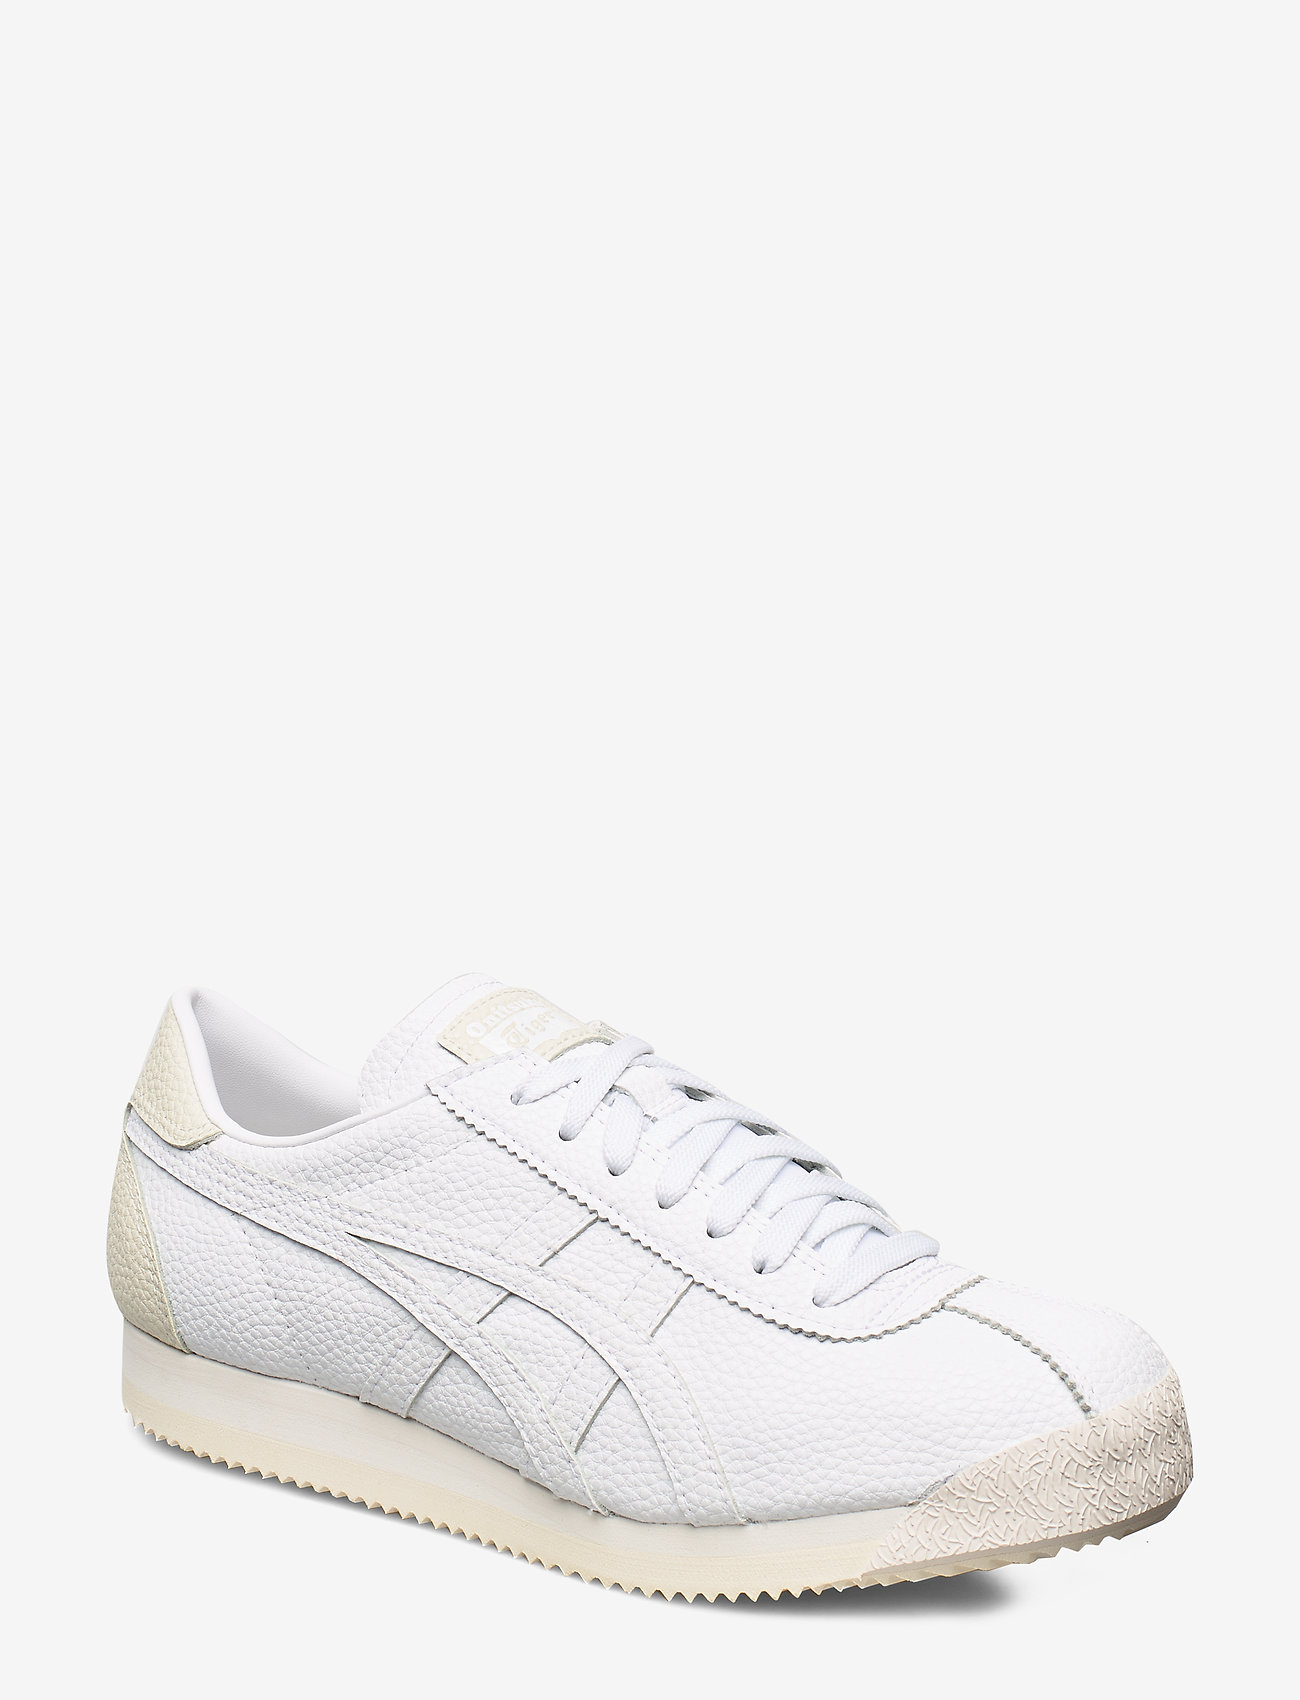 how to clean white onitsuka tiger shoes